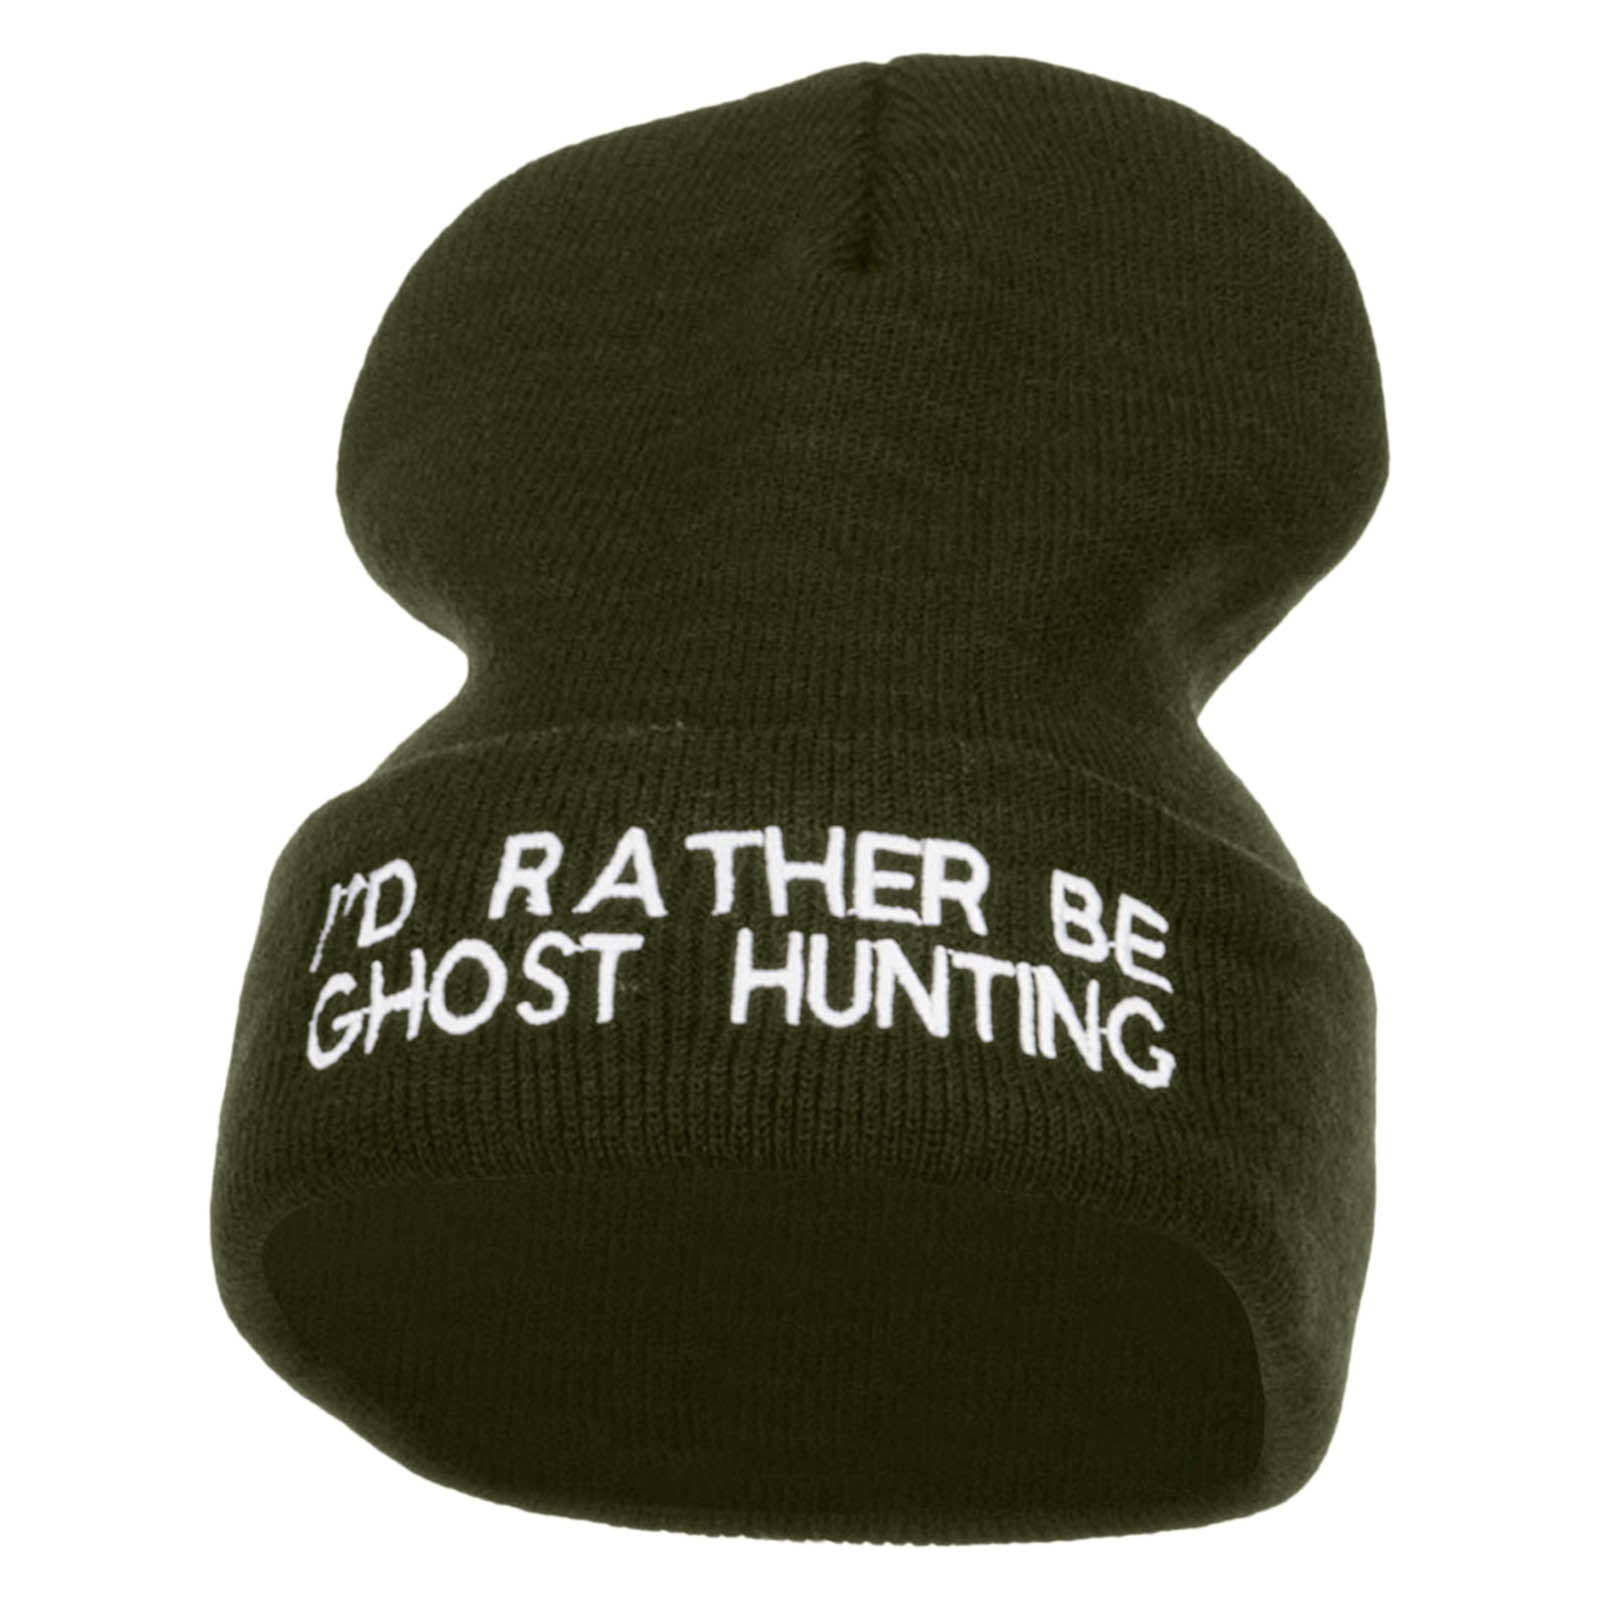 I&#039;d Rather Be Ghost Hunting Long Beanie - Olive OSFM